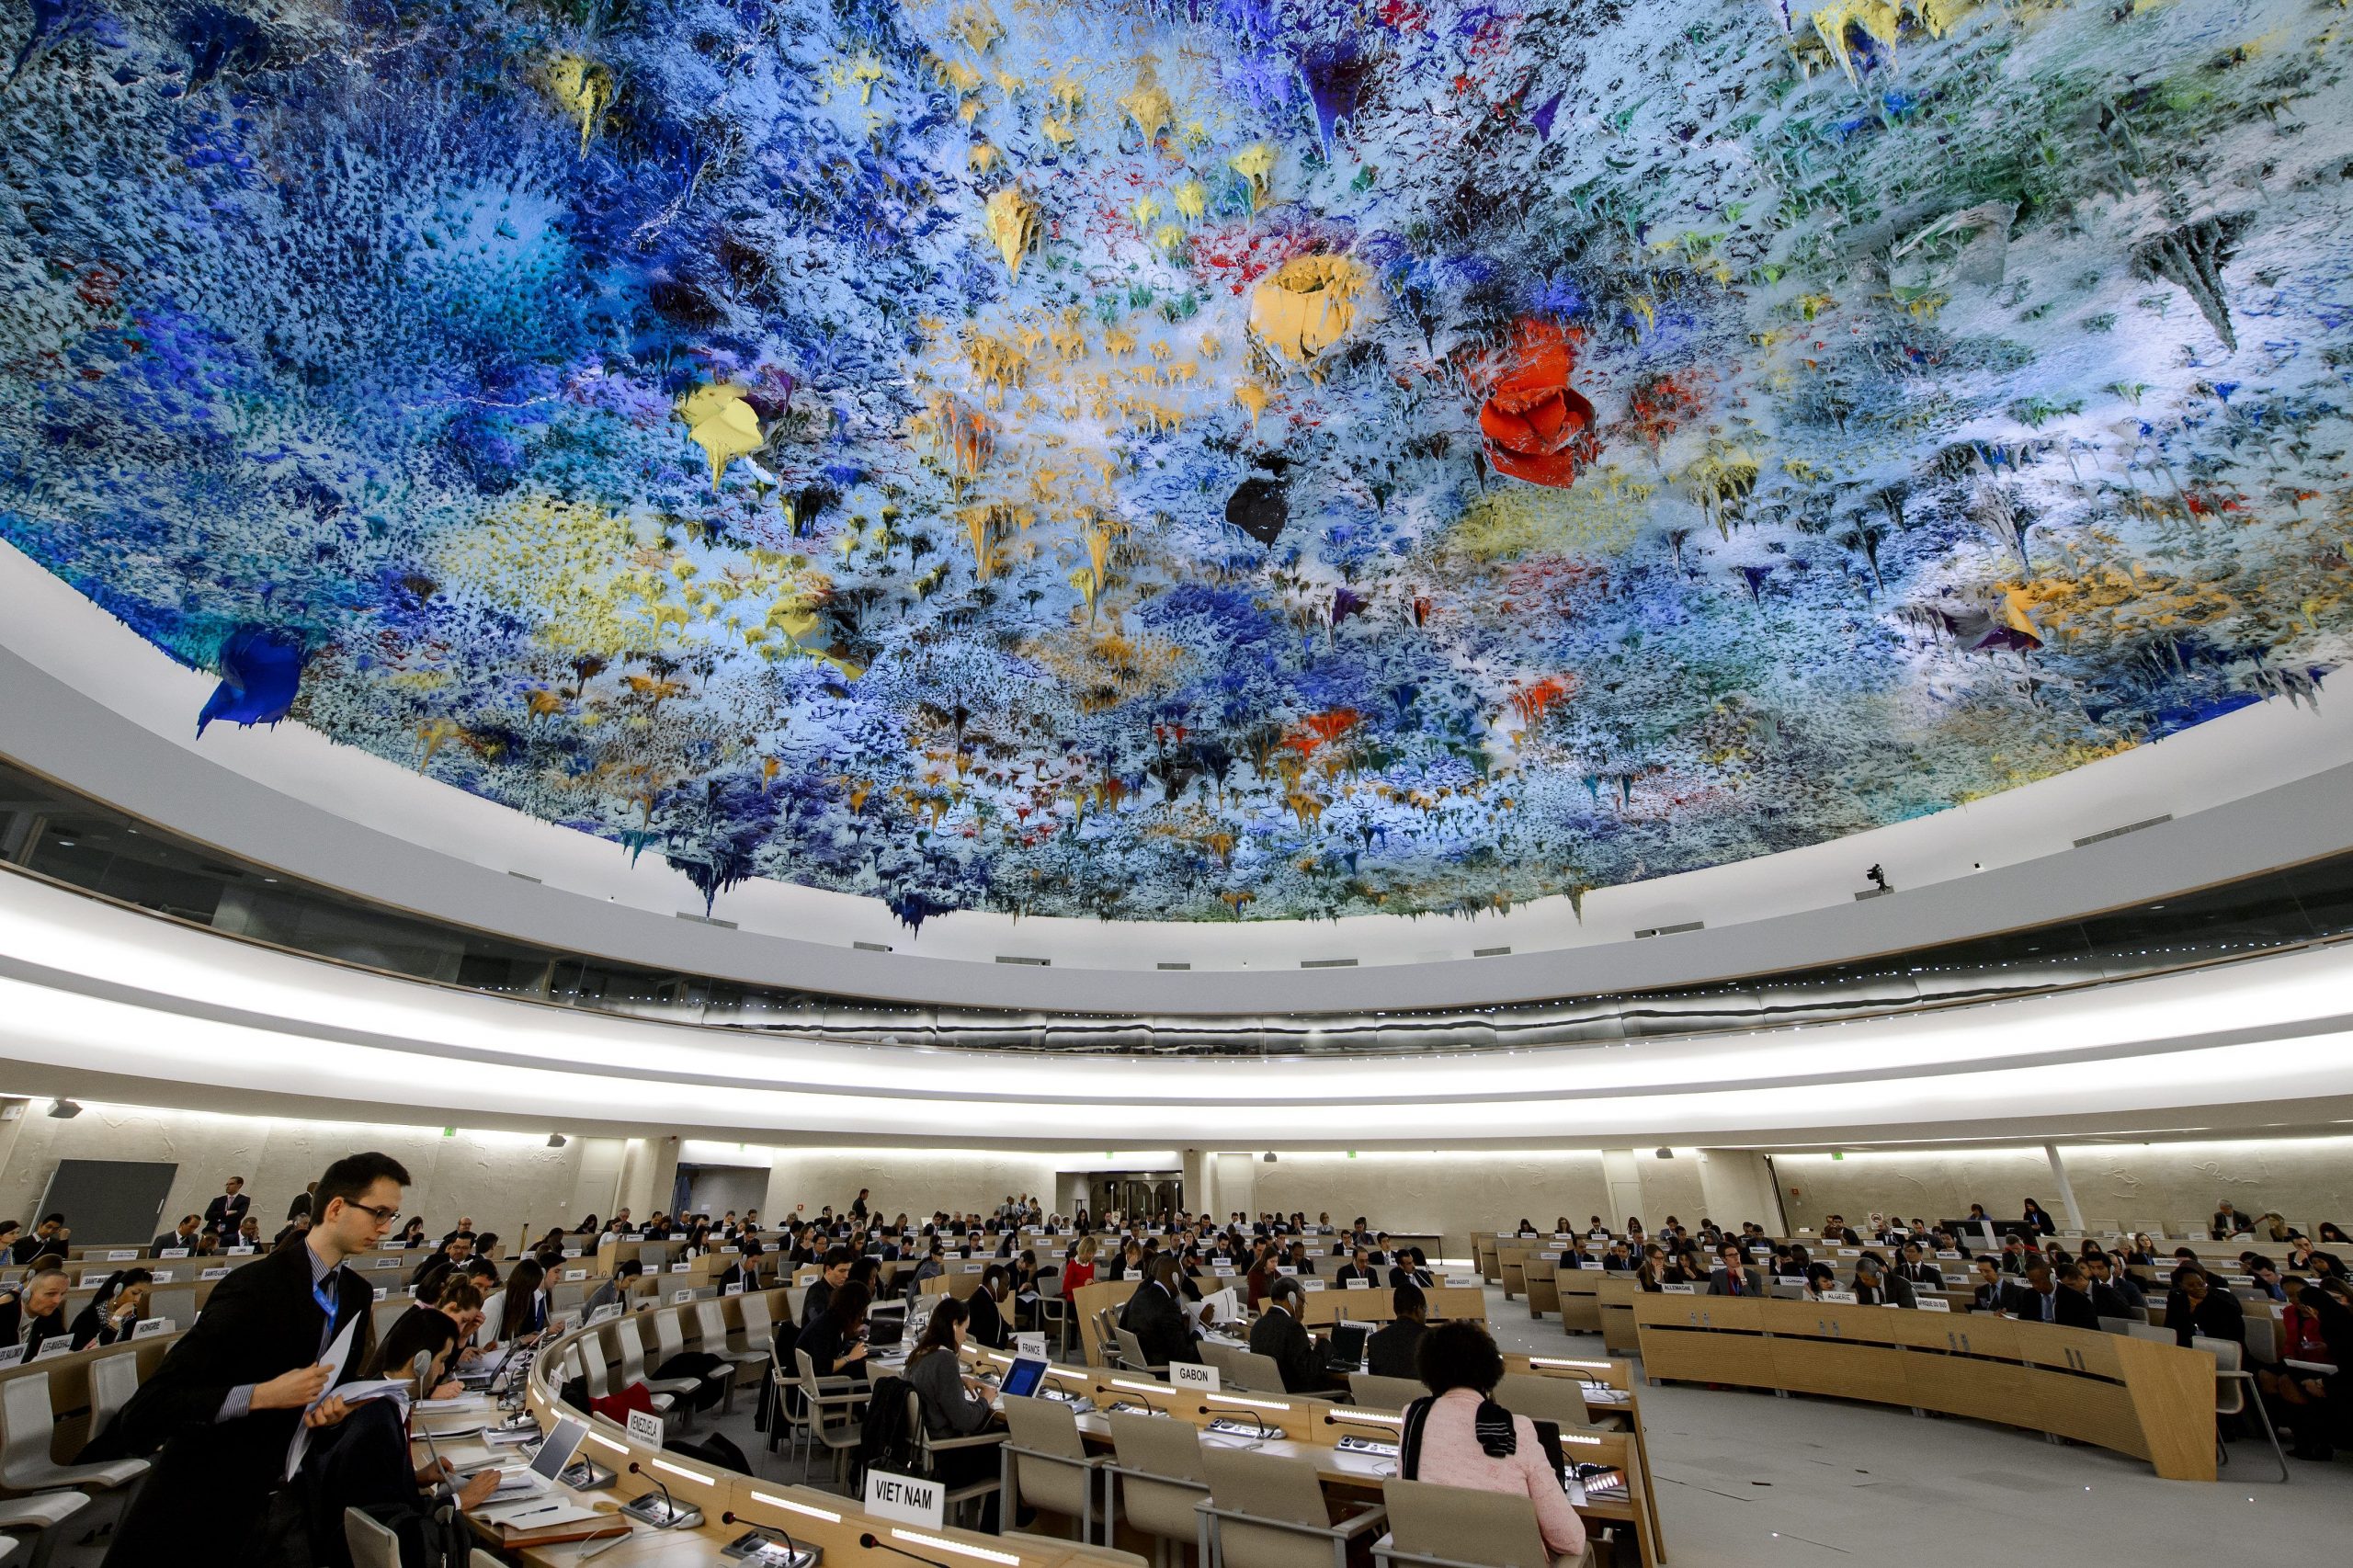 The UN Human Rights Council hears s recent report on the rights situation in the Palestinian territories occupied by Israel since 1967. (FABRICE COFFRINI/AFP/Getty Images)